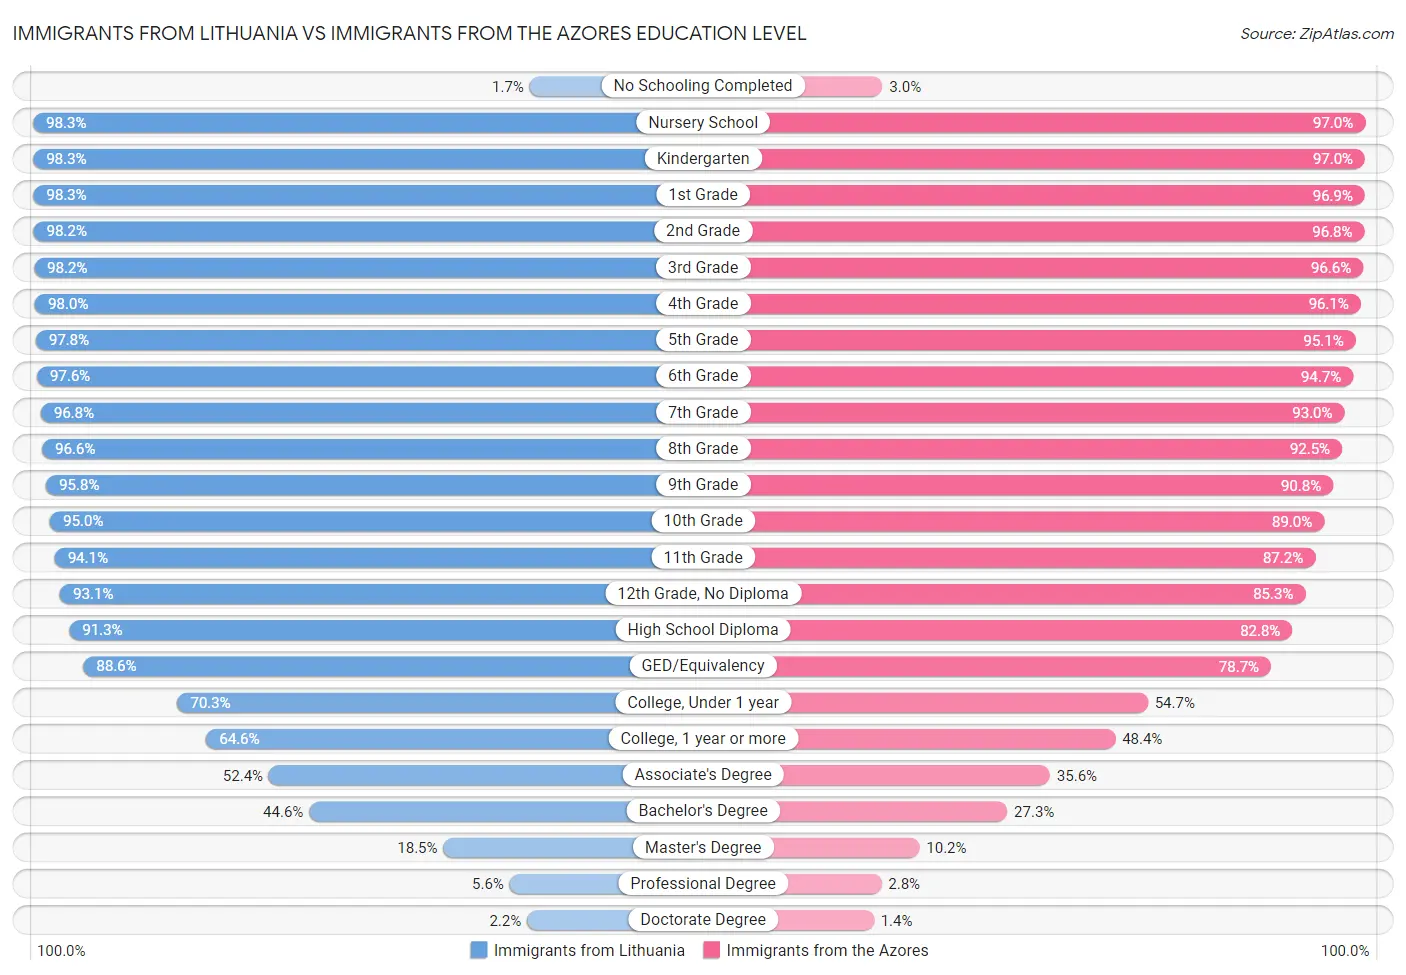 Immigrants from Lithuania vs Immigrants from the Azores Education Level